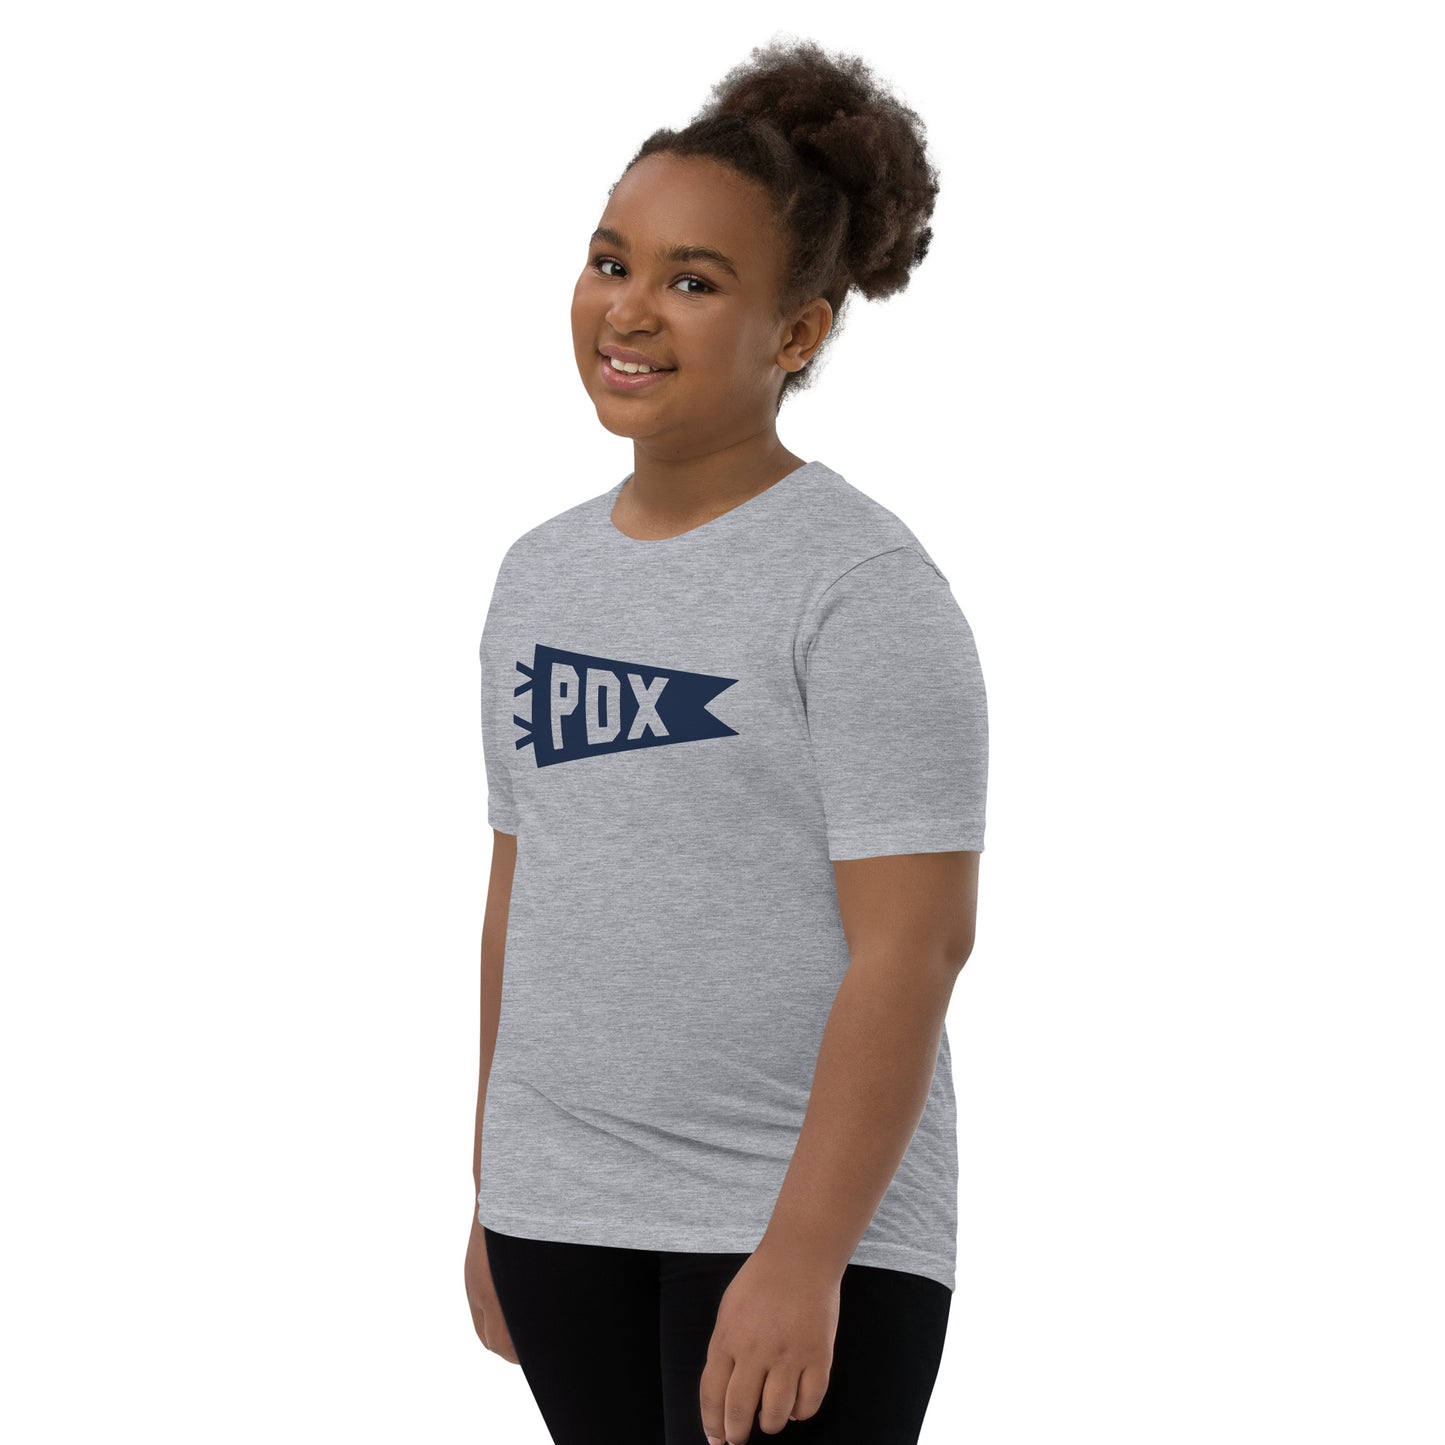 Kid's Airport Code Tee - Navy Blue Graphic • PDX Portland • YHM Designs - Image 04